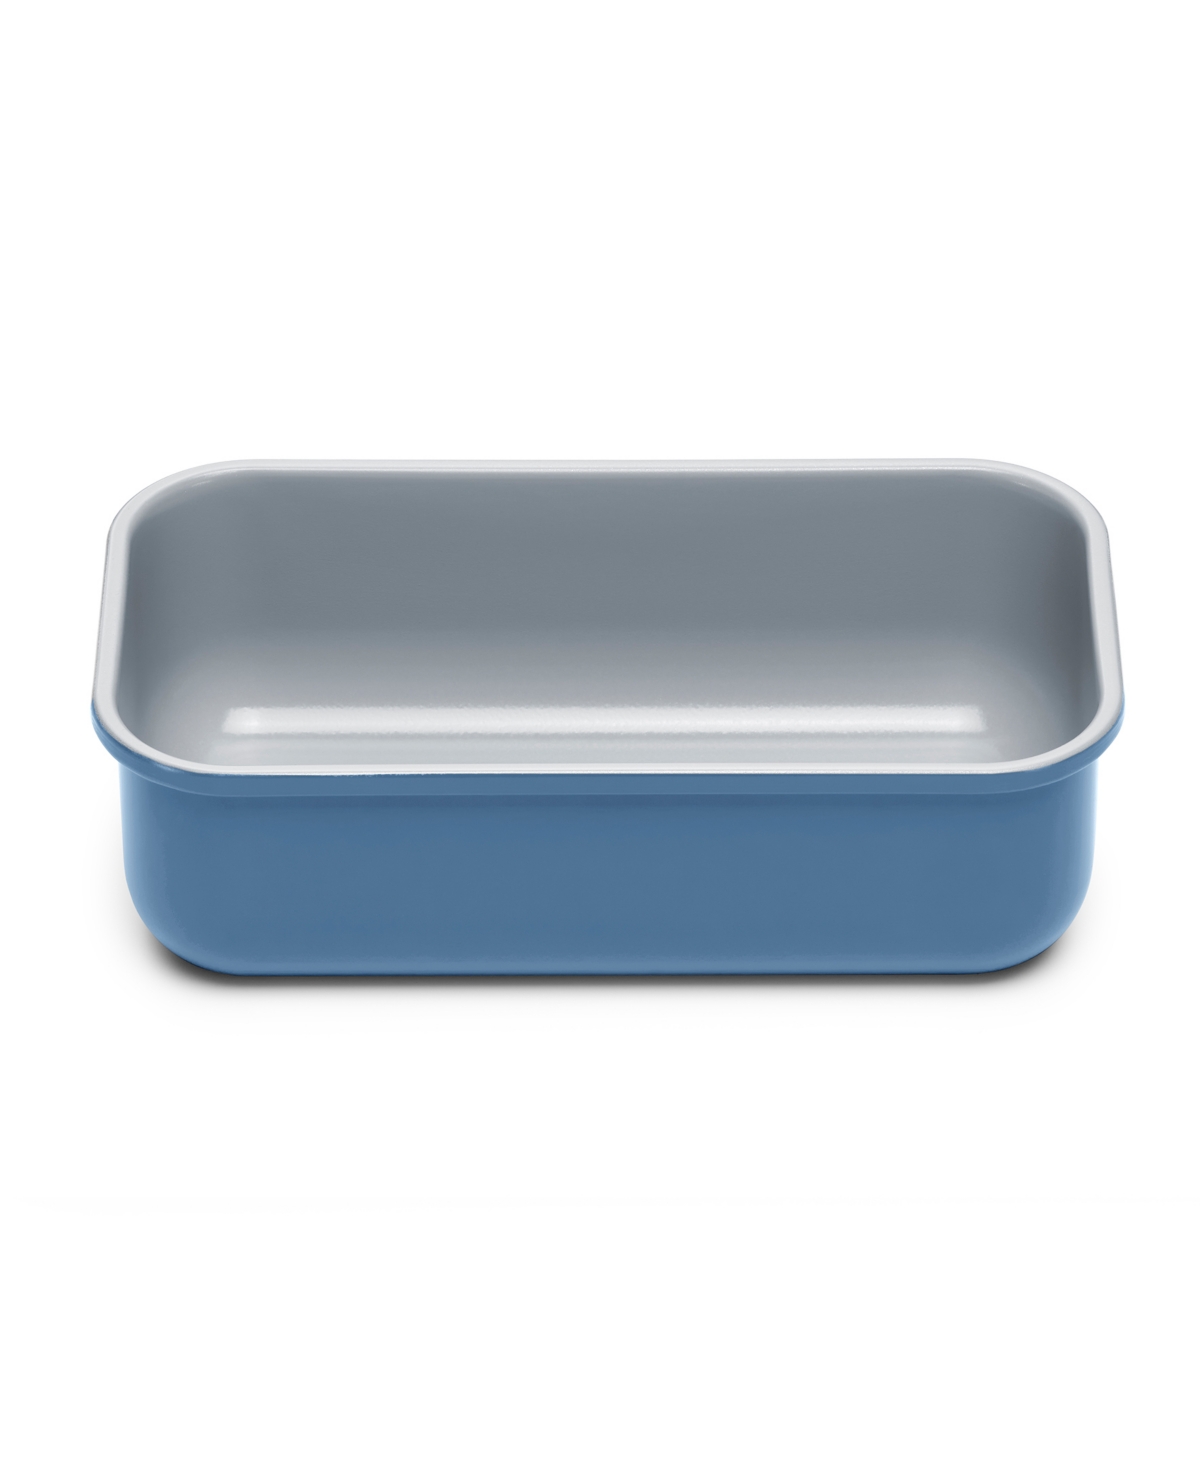 Caraway Non-stick Loaf Pan In Slate